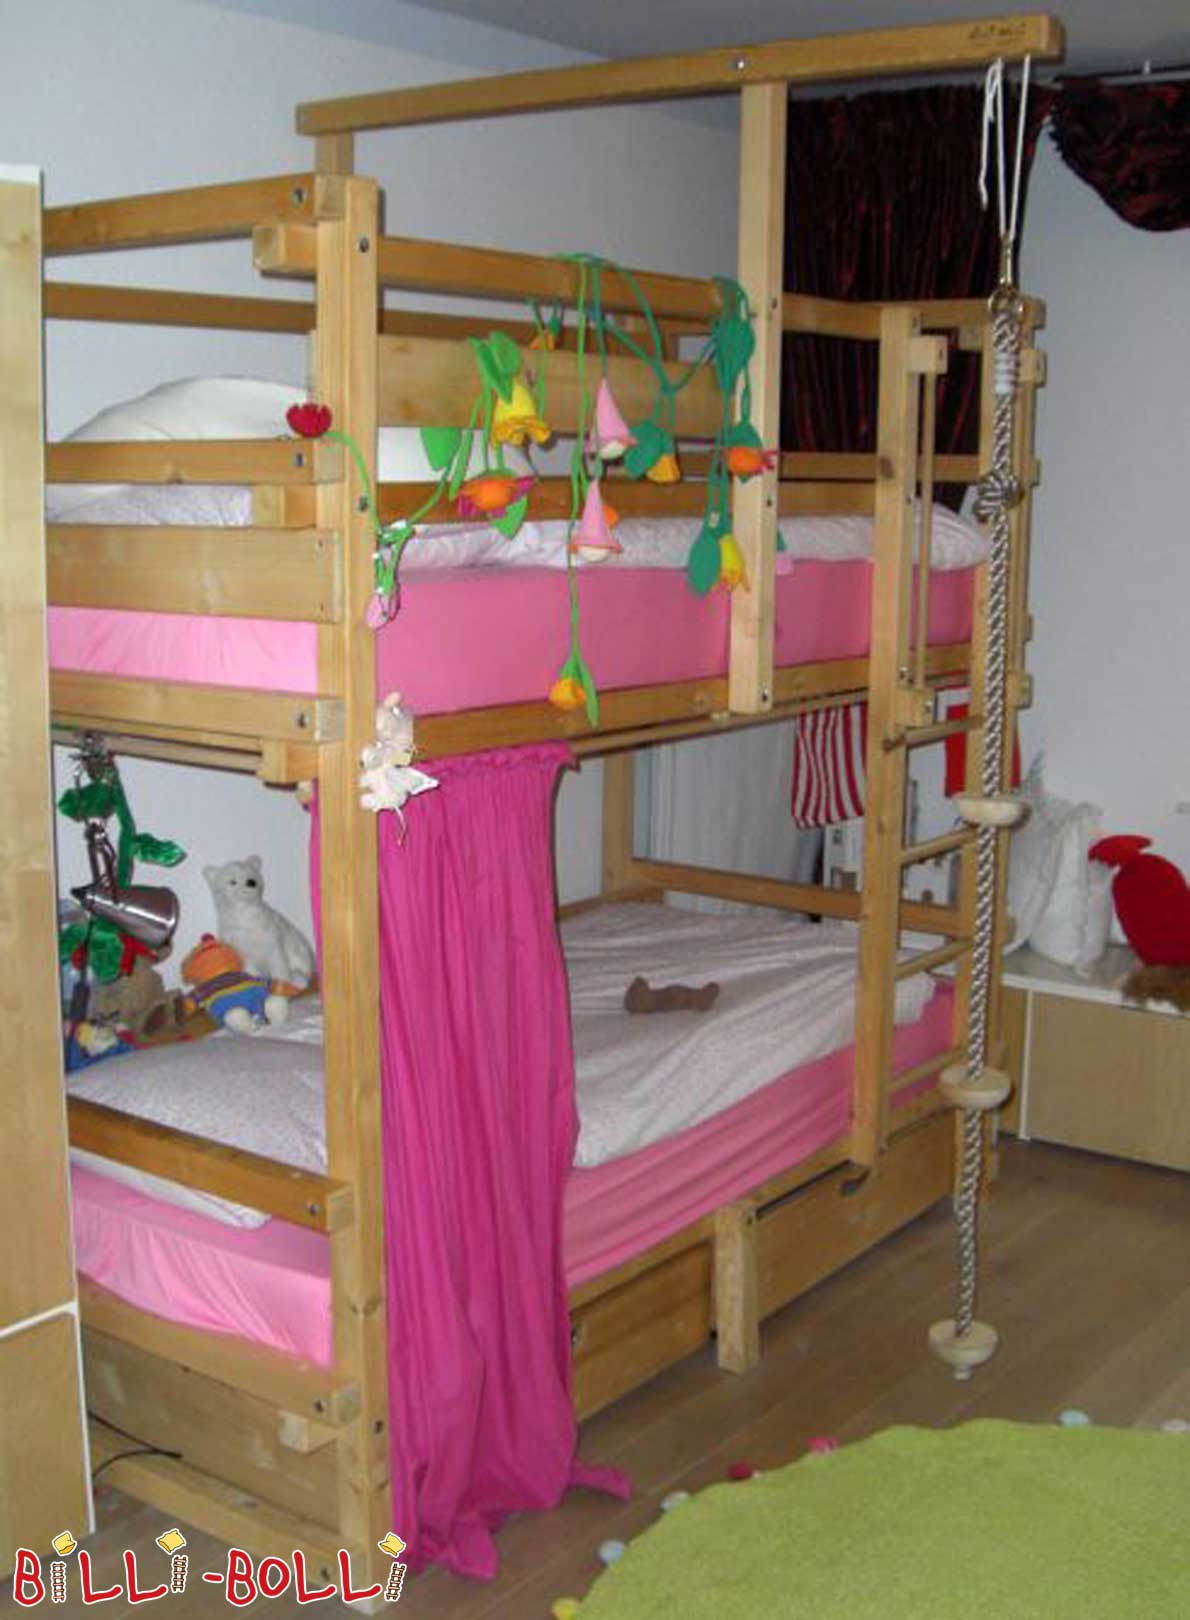 Billi-Bolli bunk bed, spruce untreated (Category: second hand bunk bed)